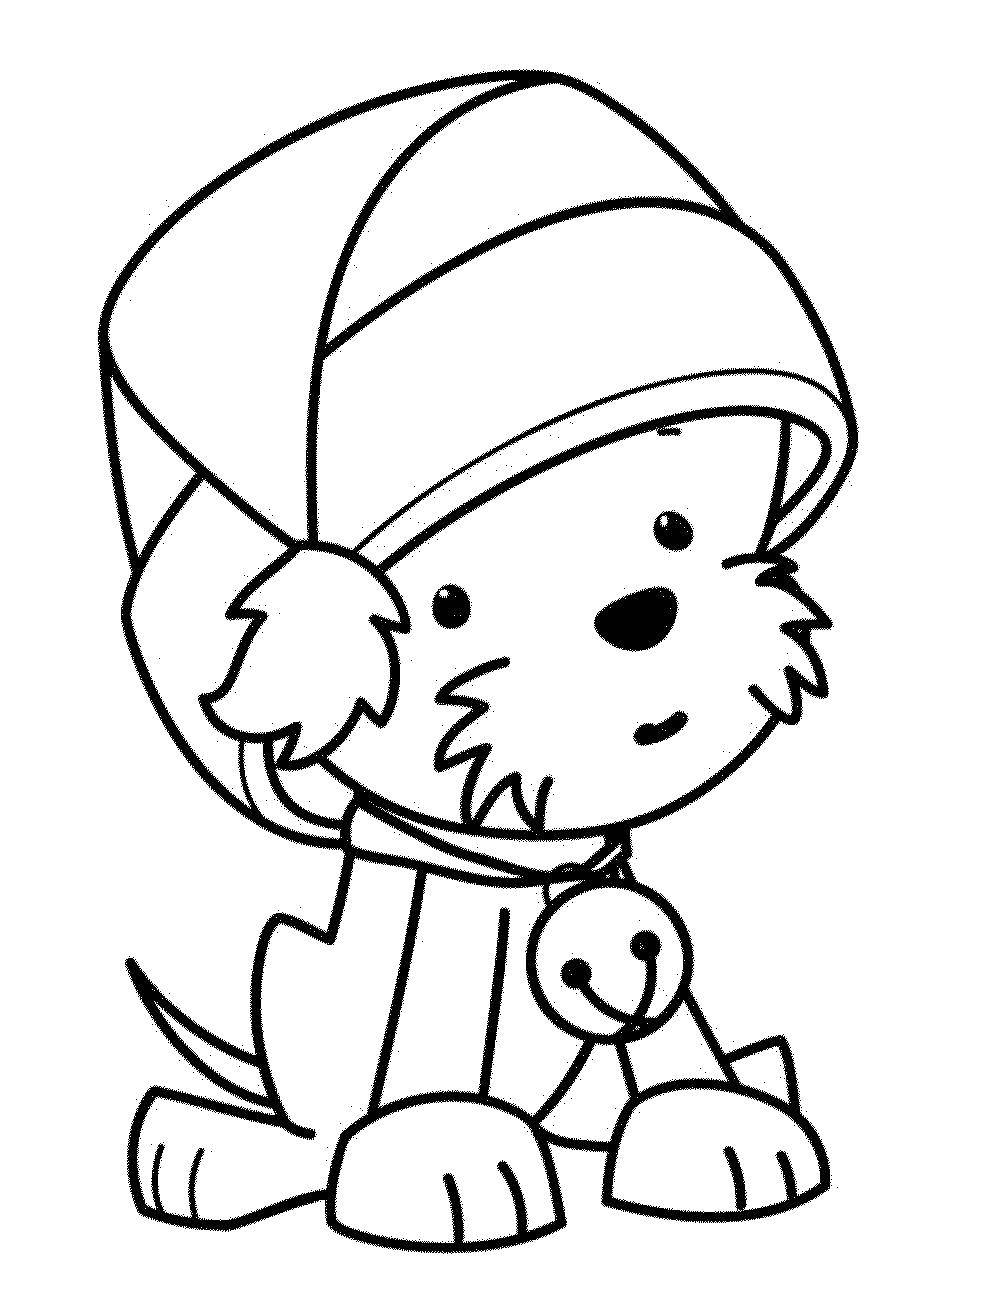 Coloring Funny dog. Category Pets allowed. Tags:  dog with hat, dog with the bell.